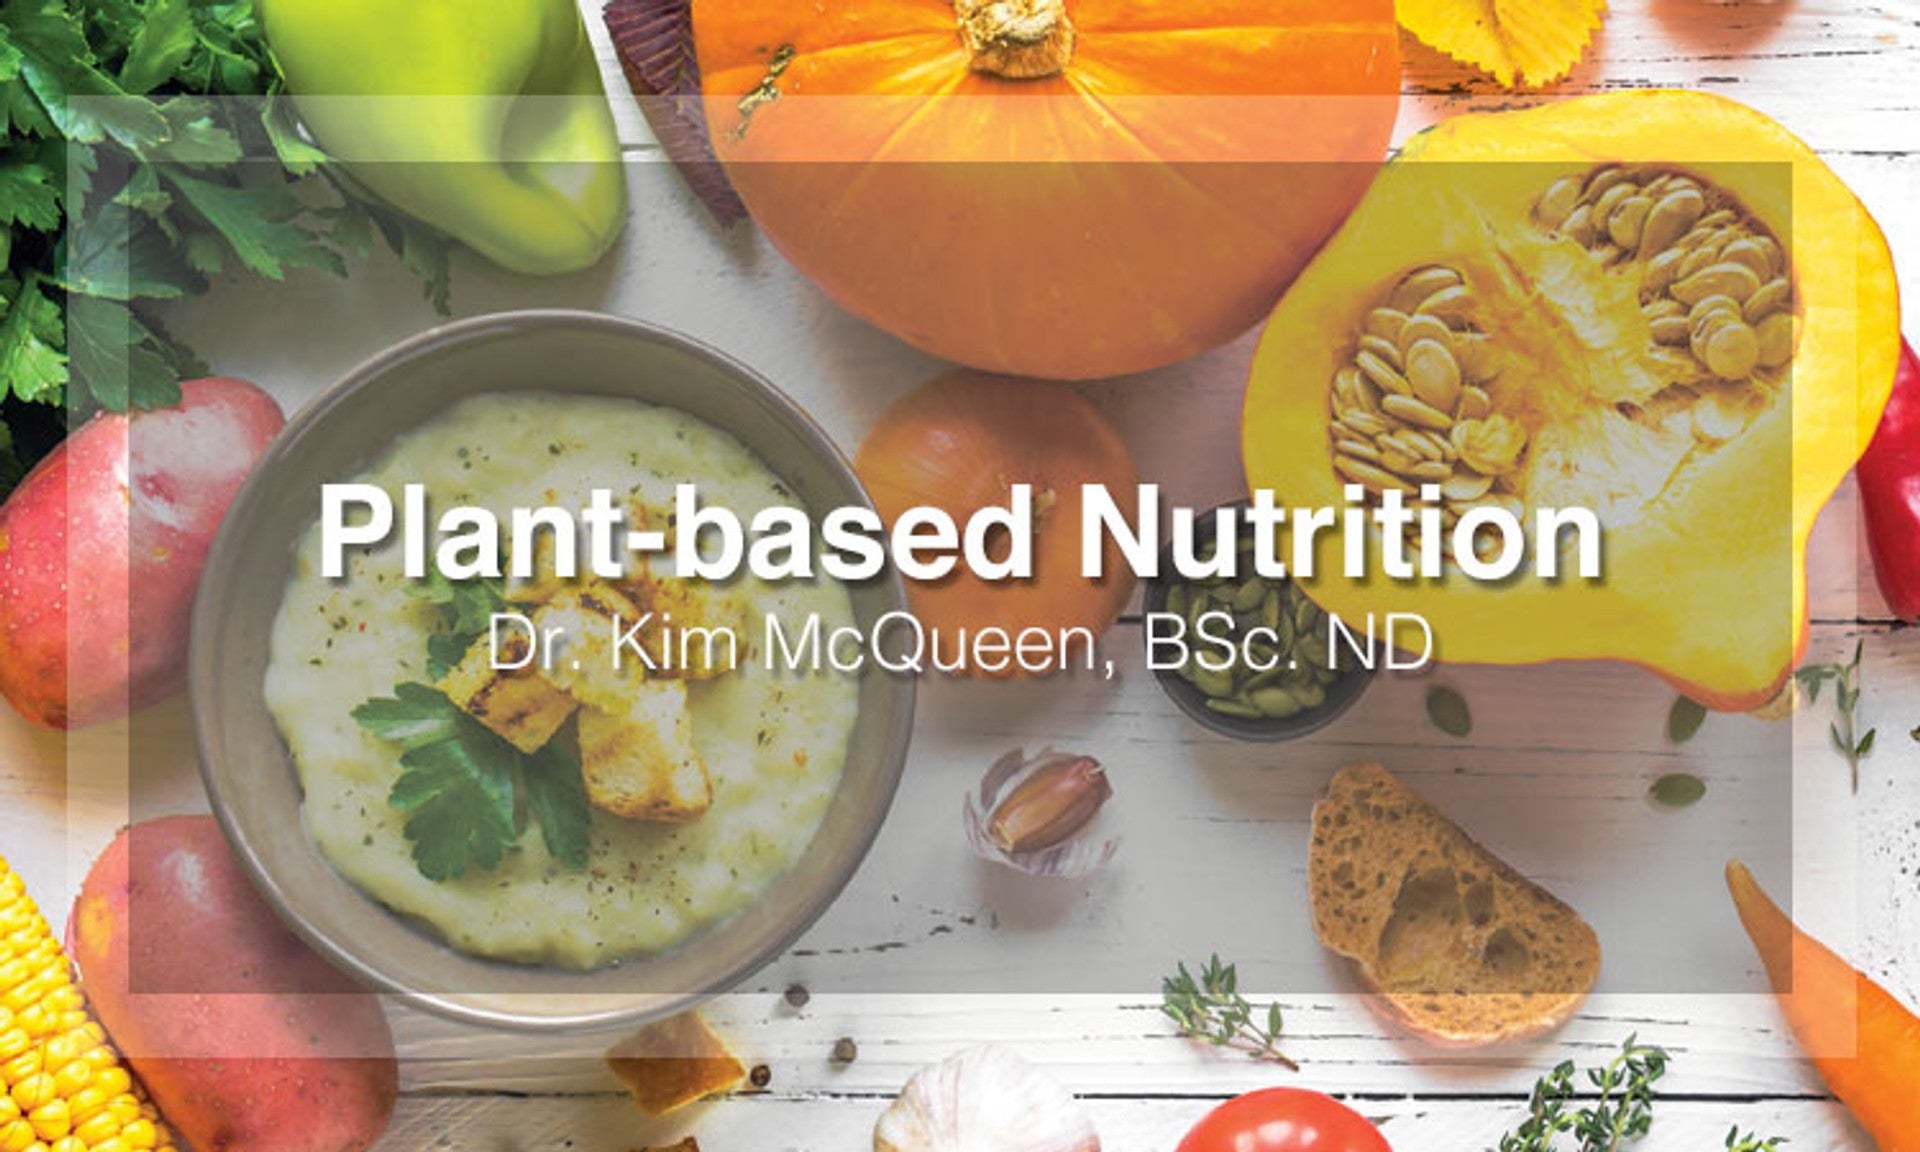 Plant-Based Nutrition